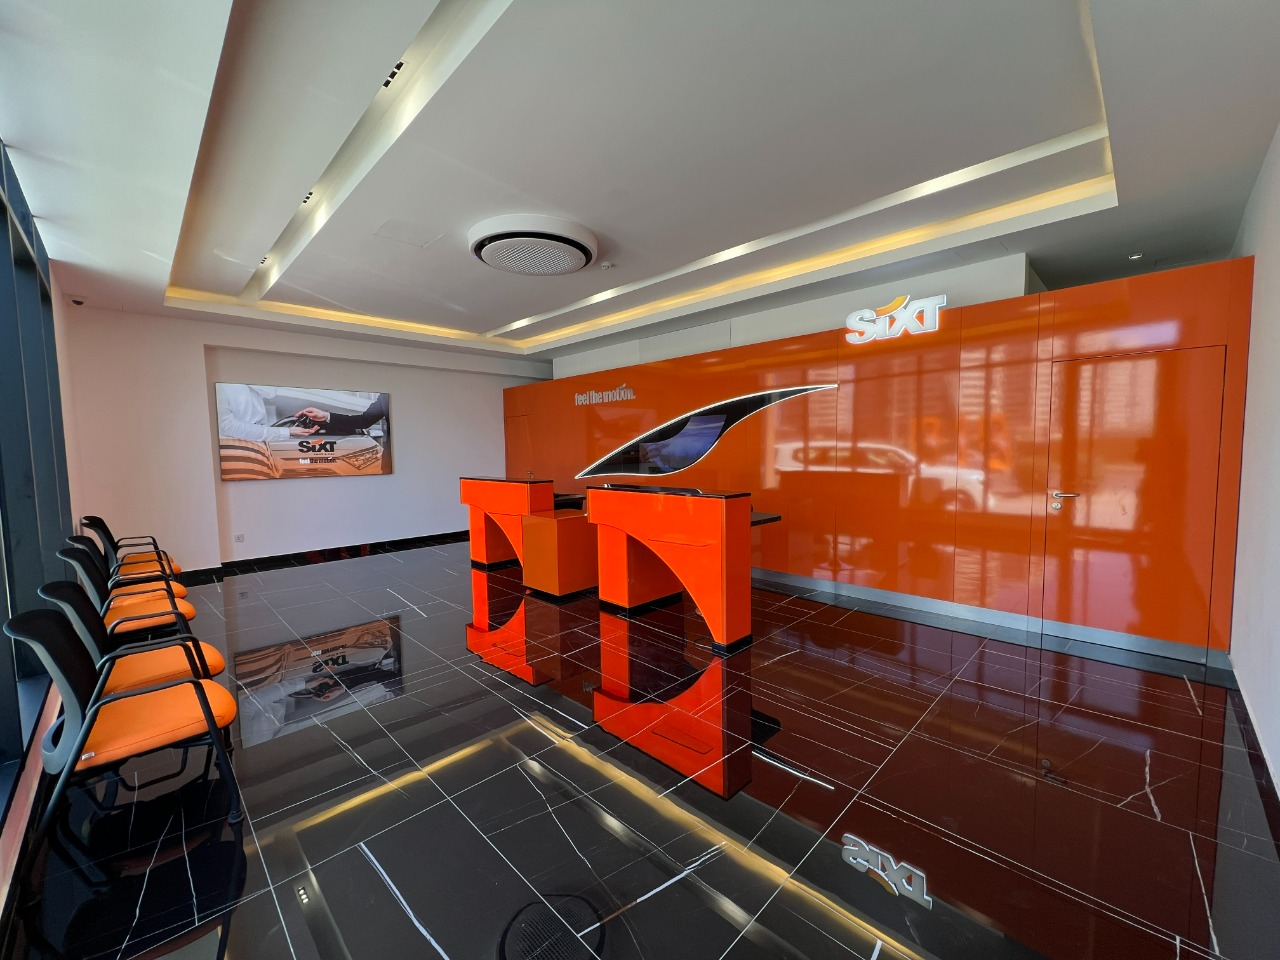 SIXT :First station opens in Erbil, Iraq